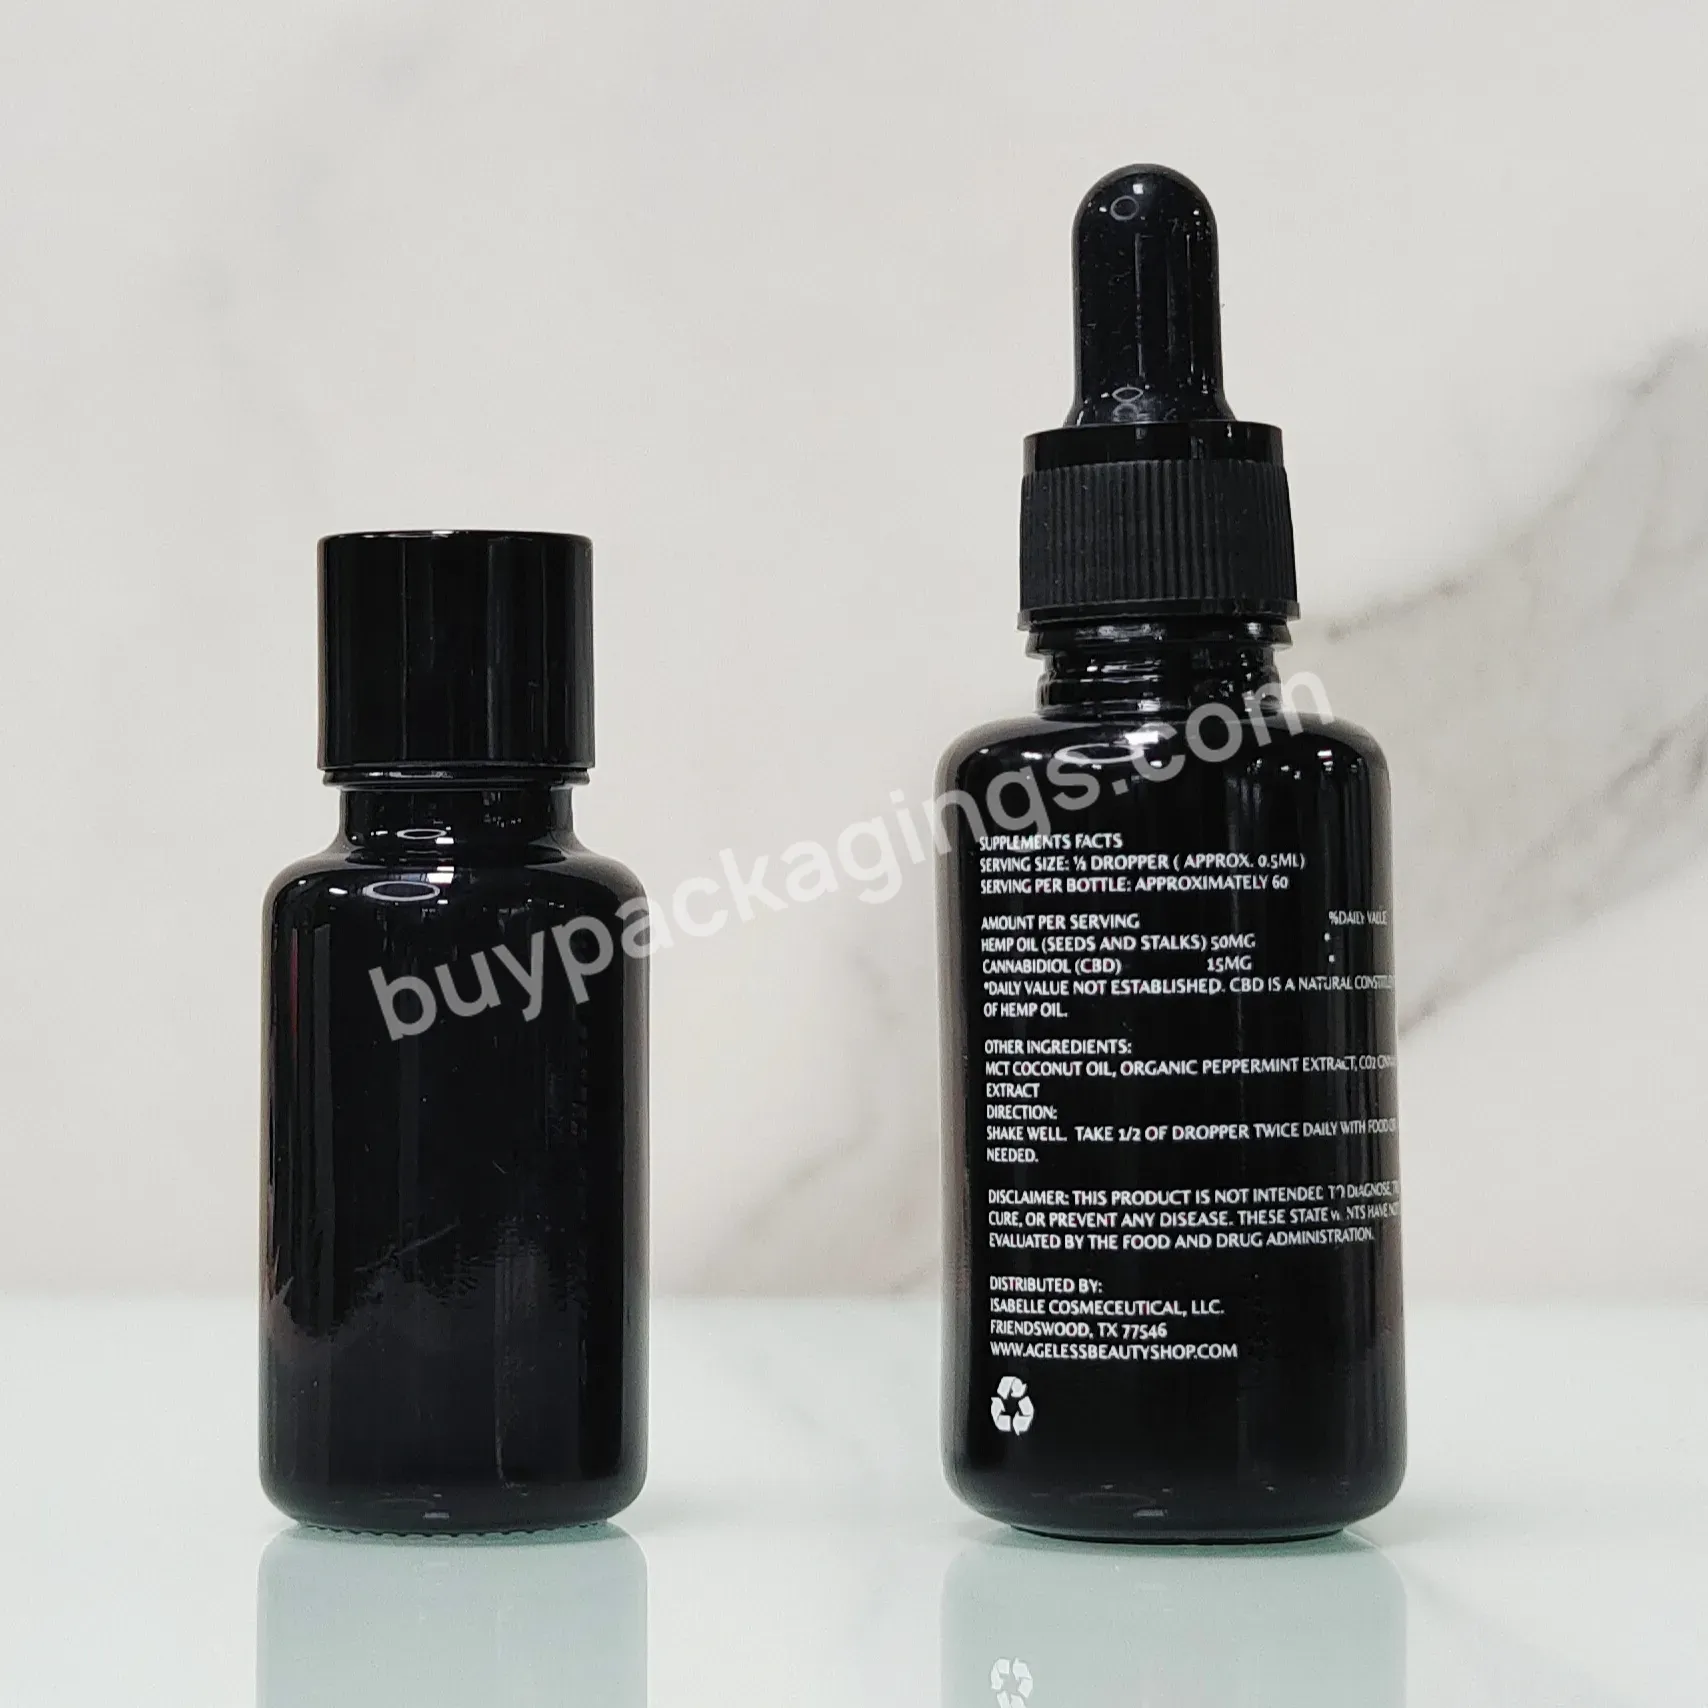 Proof Uv Empty Cosmetic Container Black 15ml 30ml 50ml 100ml Violet Glass Serum Essential Bottles - Buy 30ml Frosted Glass Dropper Serum Bottles,Oil Glass Dropper Bottles,Cylinder Glass Bottle Dropper.